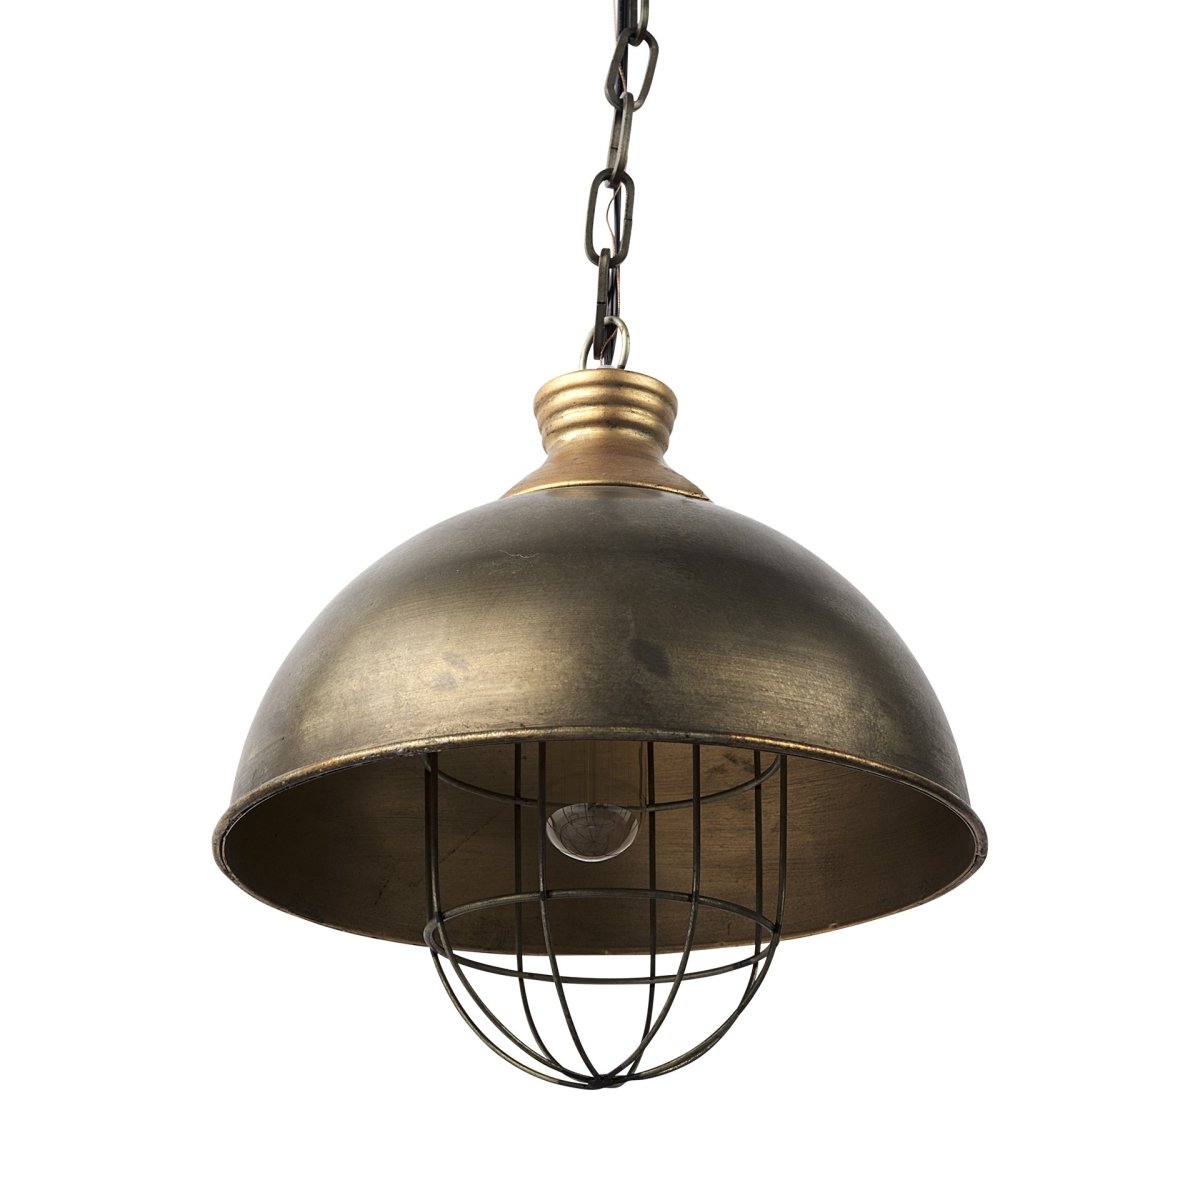 Picture of HomeRoots 392842 13.5 x 13 x 13 in. Distressed Bronze Metal Dome Hanging Light